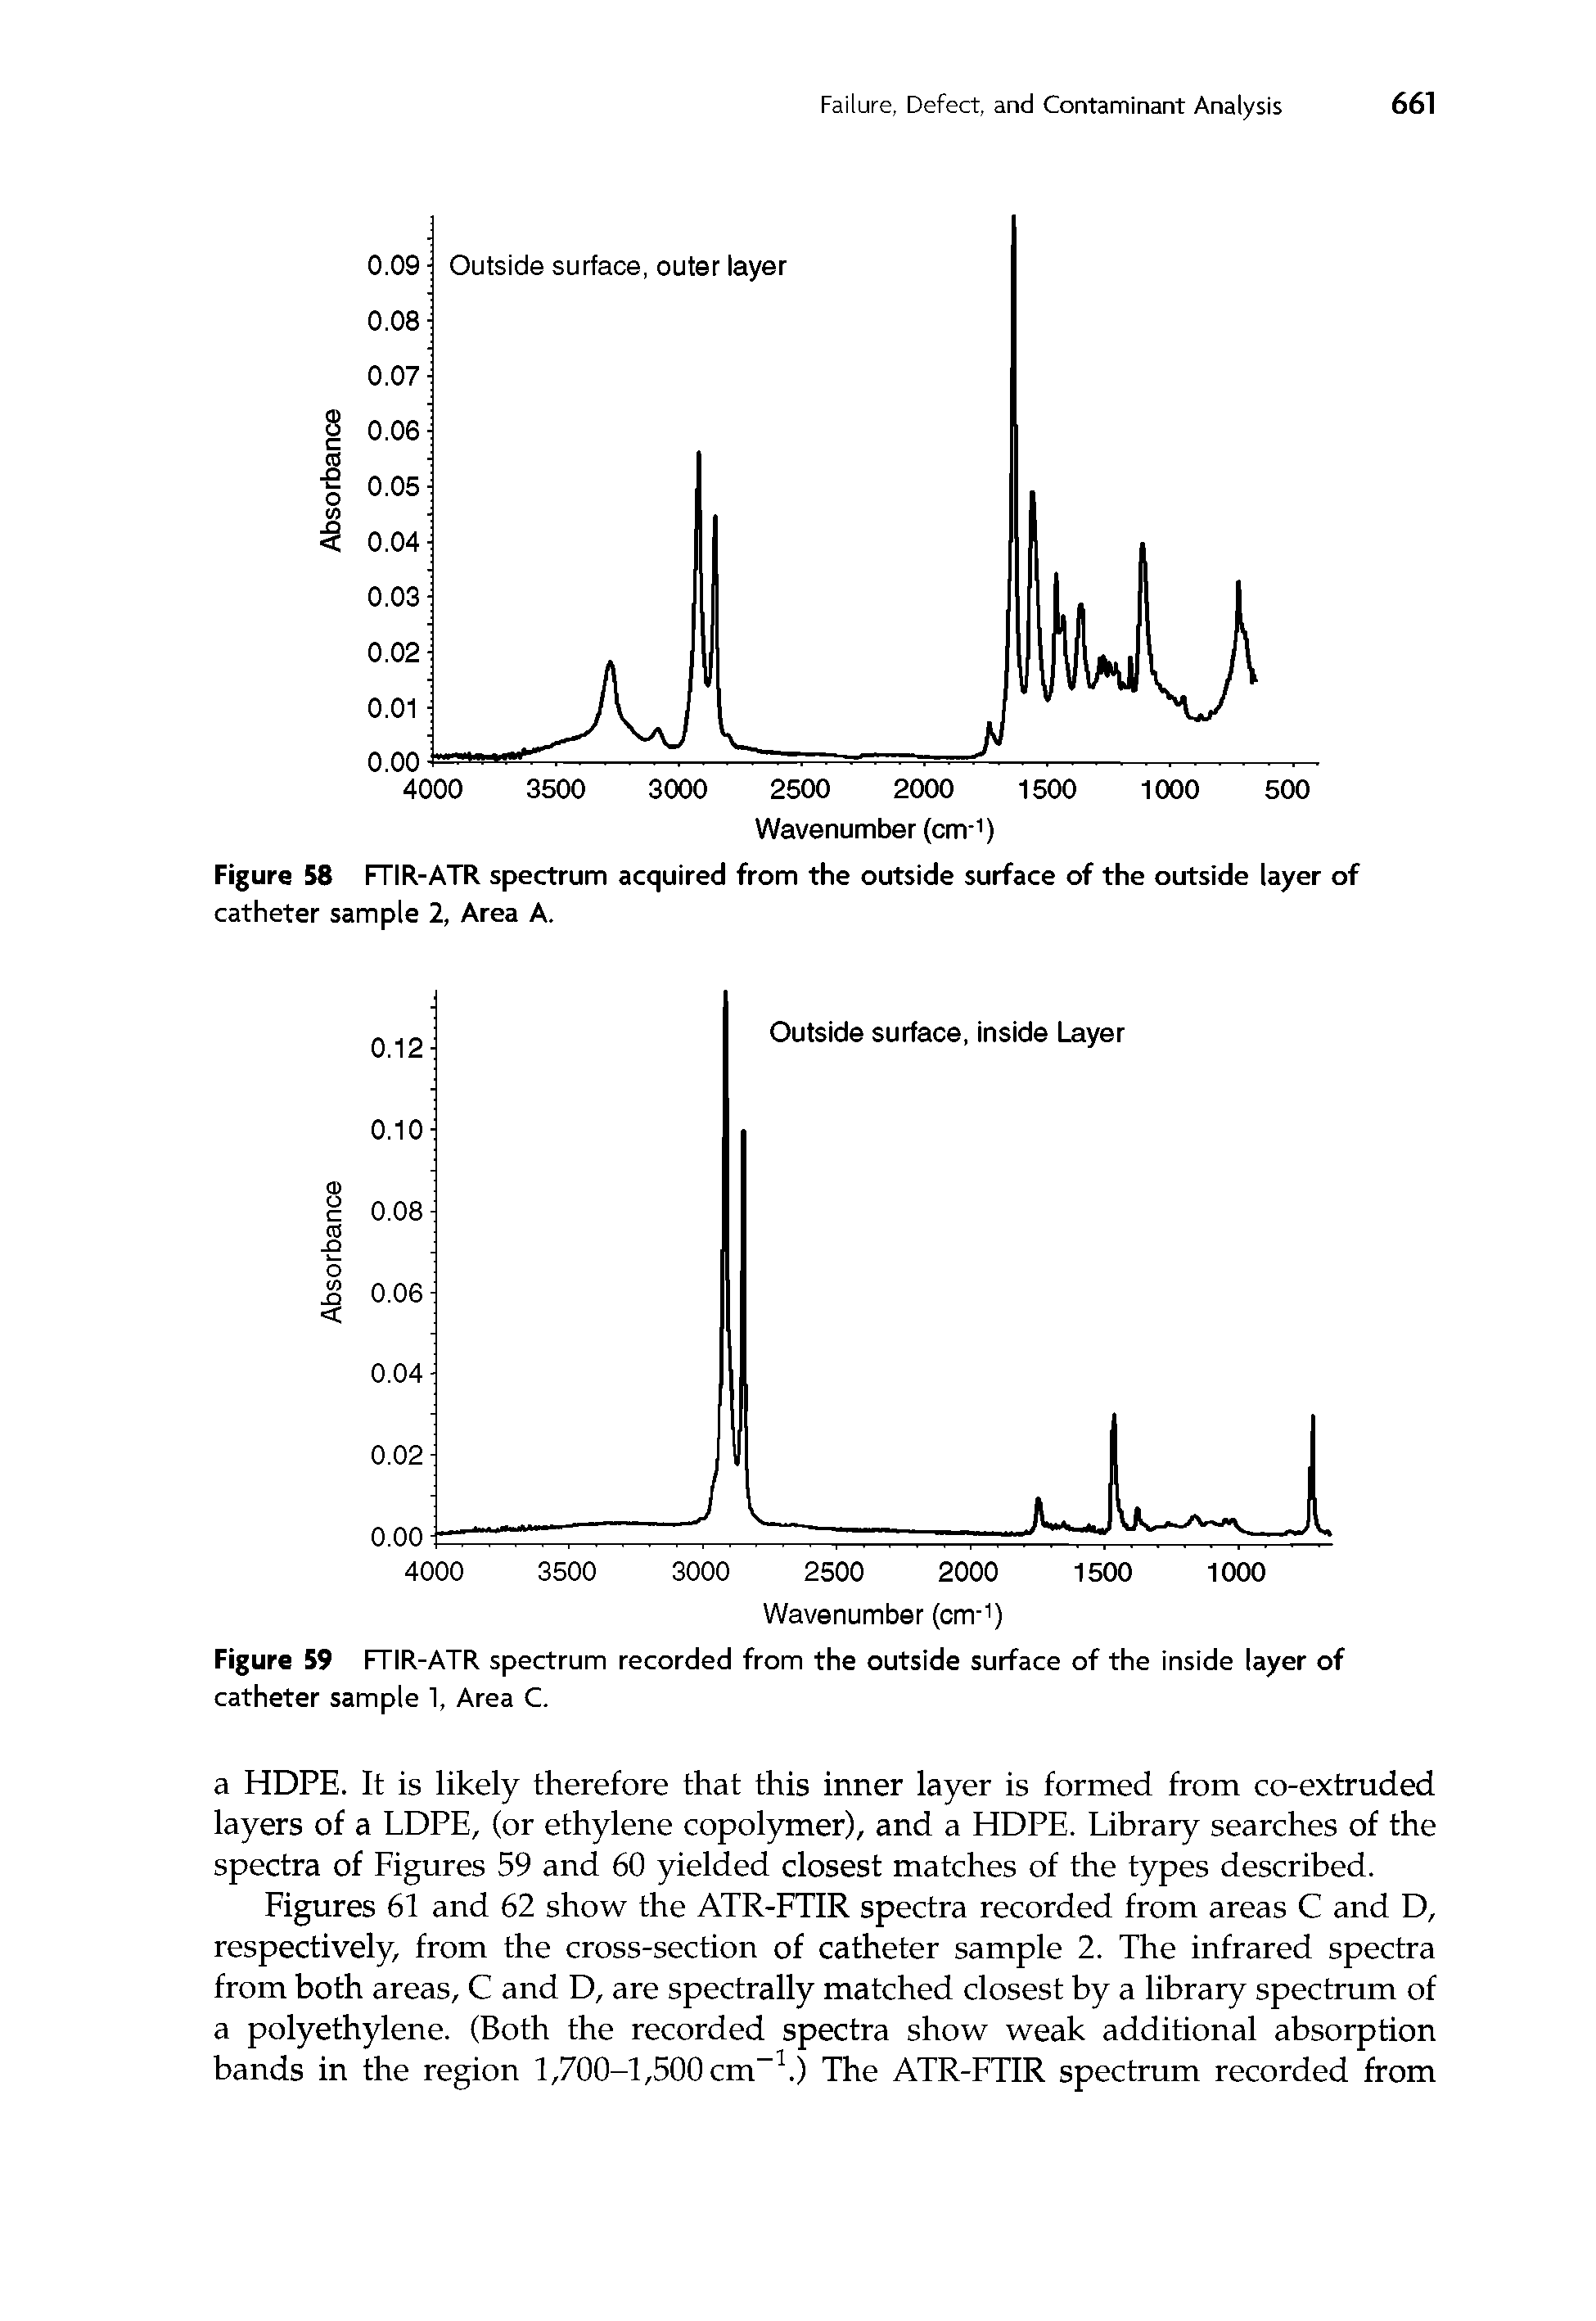 Figures 61 and 62 show the ATR-FTIR spectra recorded from areas C and D, respectively, from the cross-section of catheter sample 2. The infrared spectra from both areas, C and D, are spectrally matched closest by a library spectrum of a polyethylene. (Both the recorded spectra show weak additional absorption bands in the region 1,700-1,500 cm-1.) The ATR-FTIR spectrum recorded from...